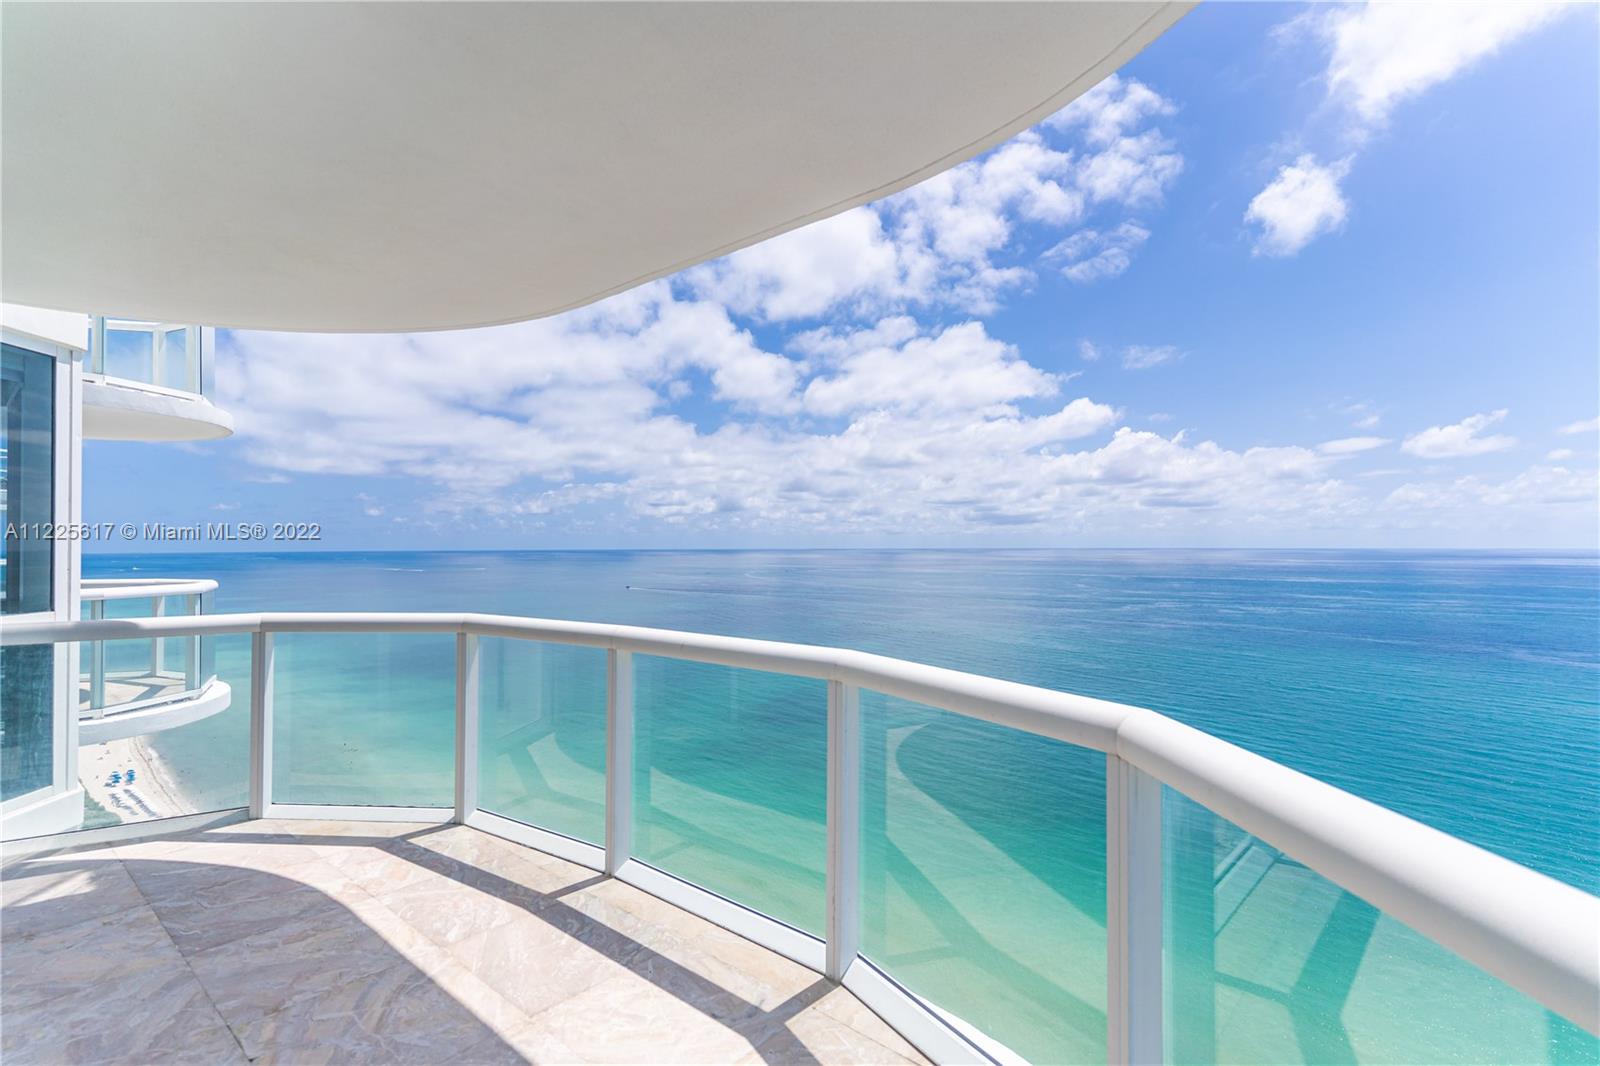 Experience striking unobstructed views of the Ocean, Miami Beach, and the Miami Skyline from this 33rd floor, wraparound balcony, corner unit. Most desirable floorplan (line 3) in the Akoya Condominium. Enjoy luxury living in the second tallest building in Miami Beach. Features include a perfectly delegated floorplan, 12 ft floor-to-ceiling sliding glass doors and windows, marble flooring throughout and a fully equipped kitchen with maple cabinetry, stainless steel appliances, and black granite countertops. Master bath features a Jacuzzi with separate shower and double vanity. Building amenities include a fully equipped fitness center, sauna/steam room, heated pool, tennis & racquetball courts, BBQ area and private beach service. 24-Hour valet parking, lobby and building security.